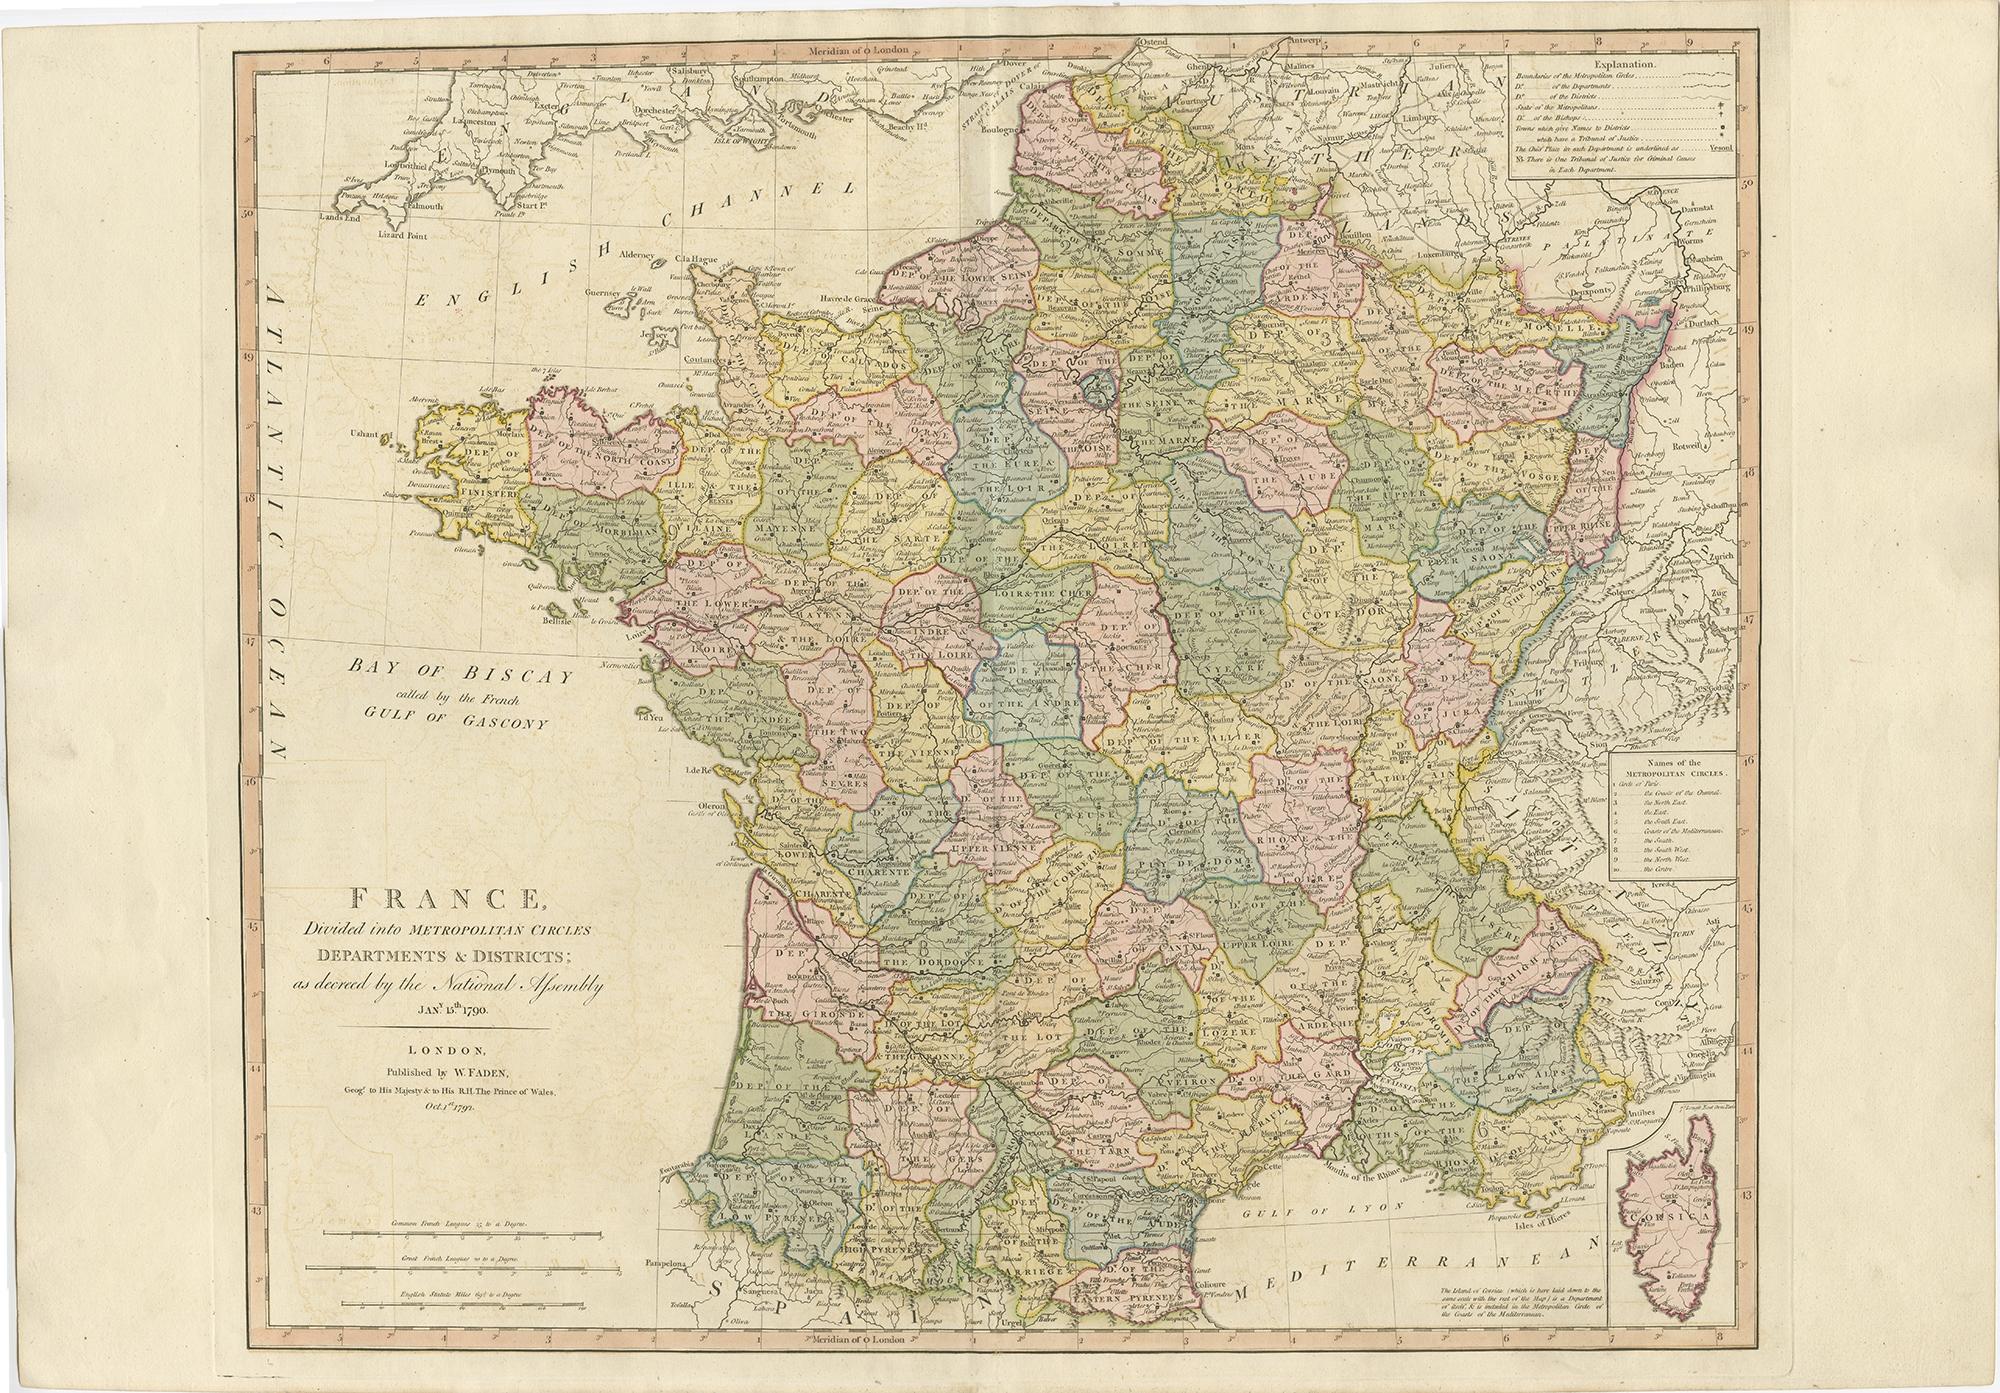 Antique map titled 'France divided into Metropolitan Circles (..)'. 

Large, original antique map of France, with a small inset of the island of Corsica. Published by W. Faden, 1792. 

Artists and Engravers: William Faden (1749-1836) was the